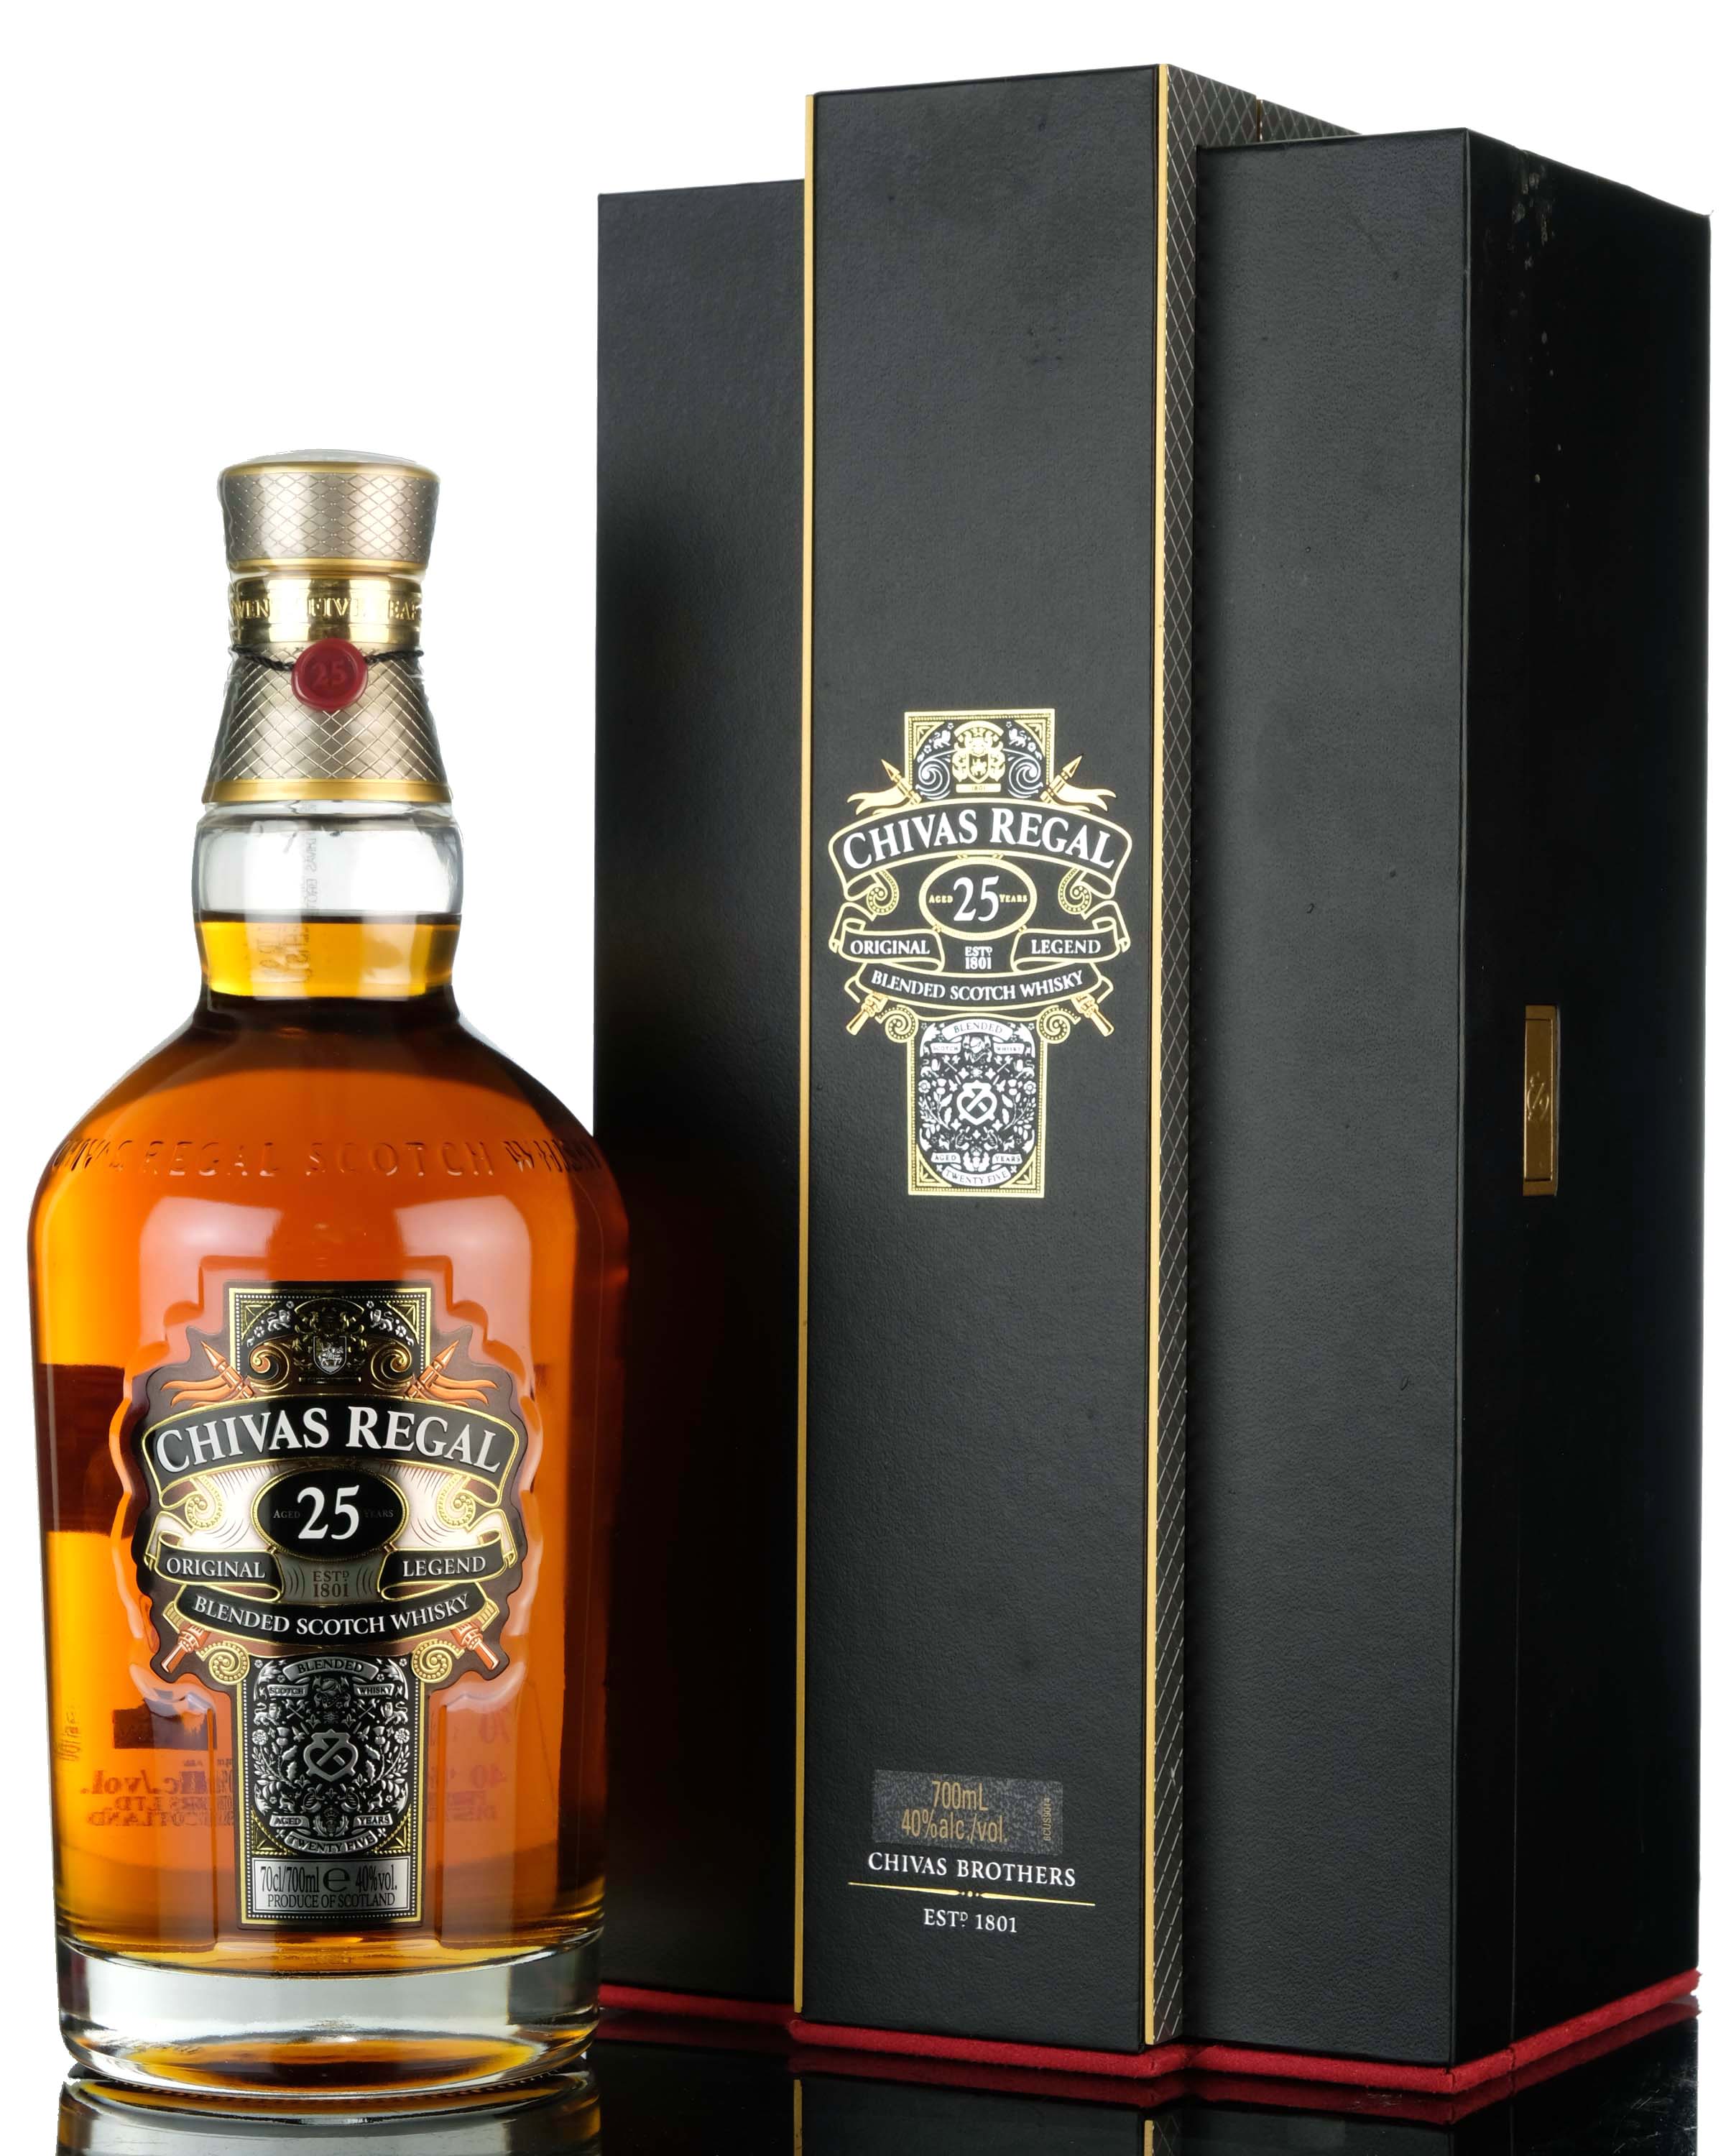 Chivas Regal 25 Year Old - Limited Edition